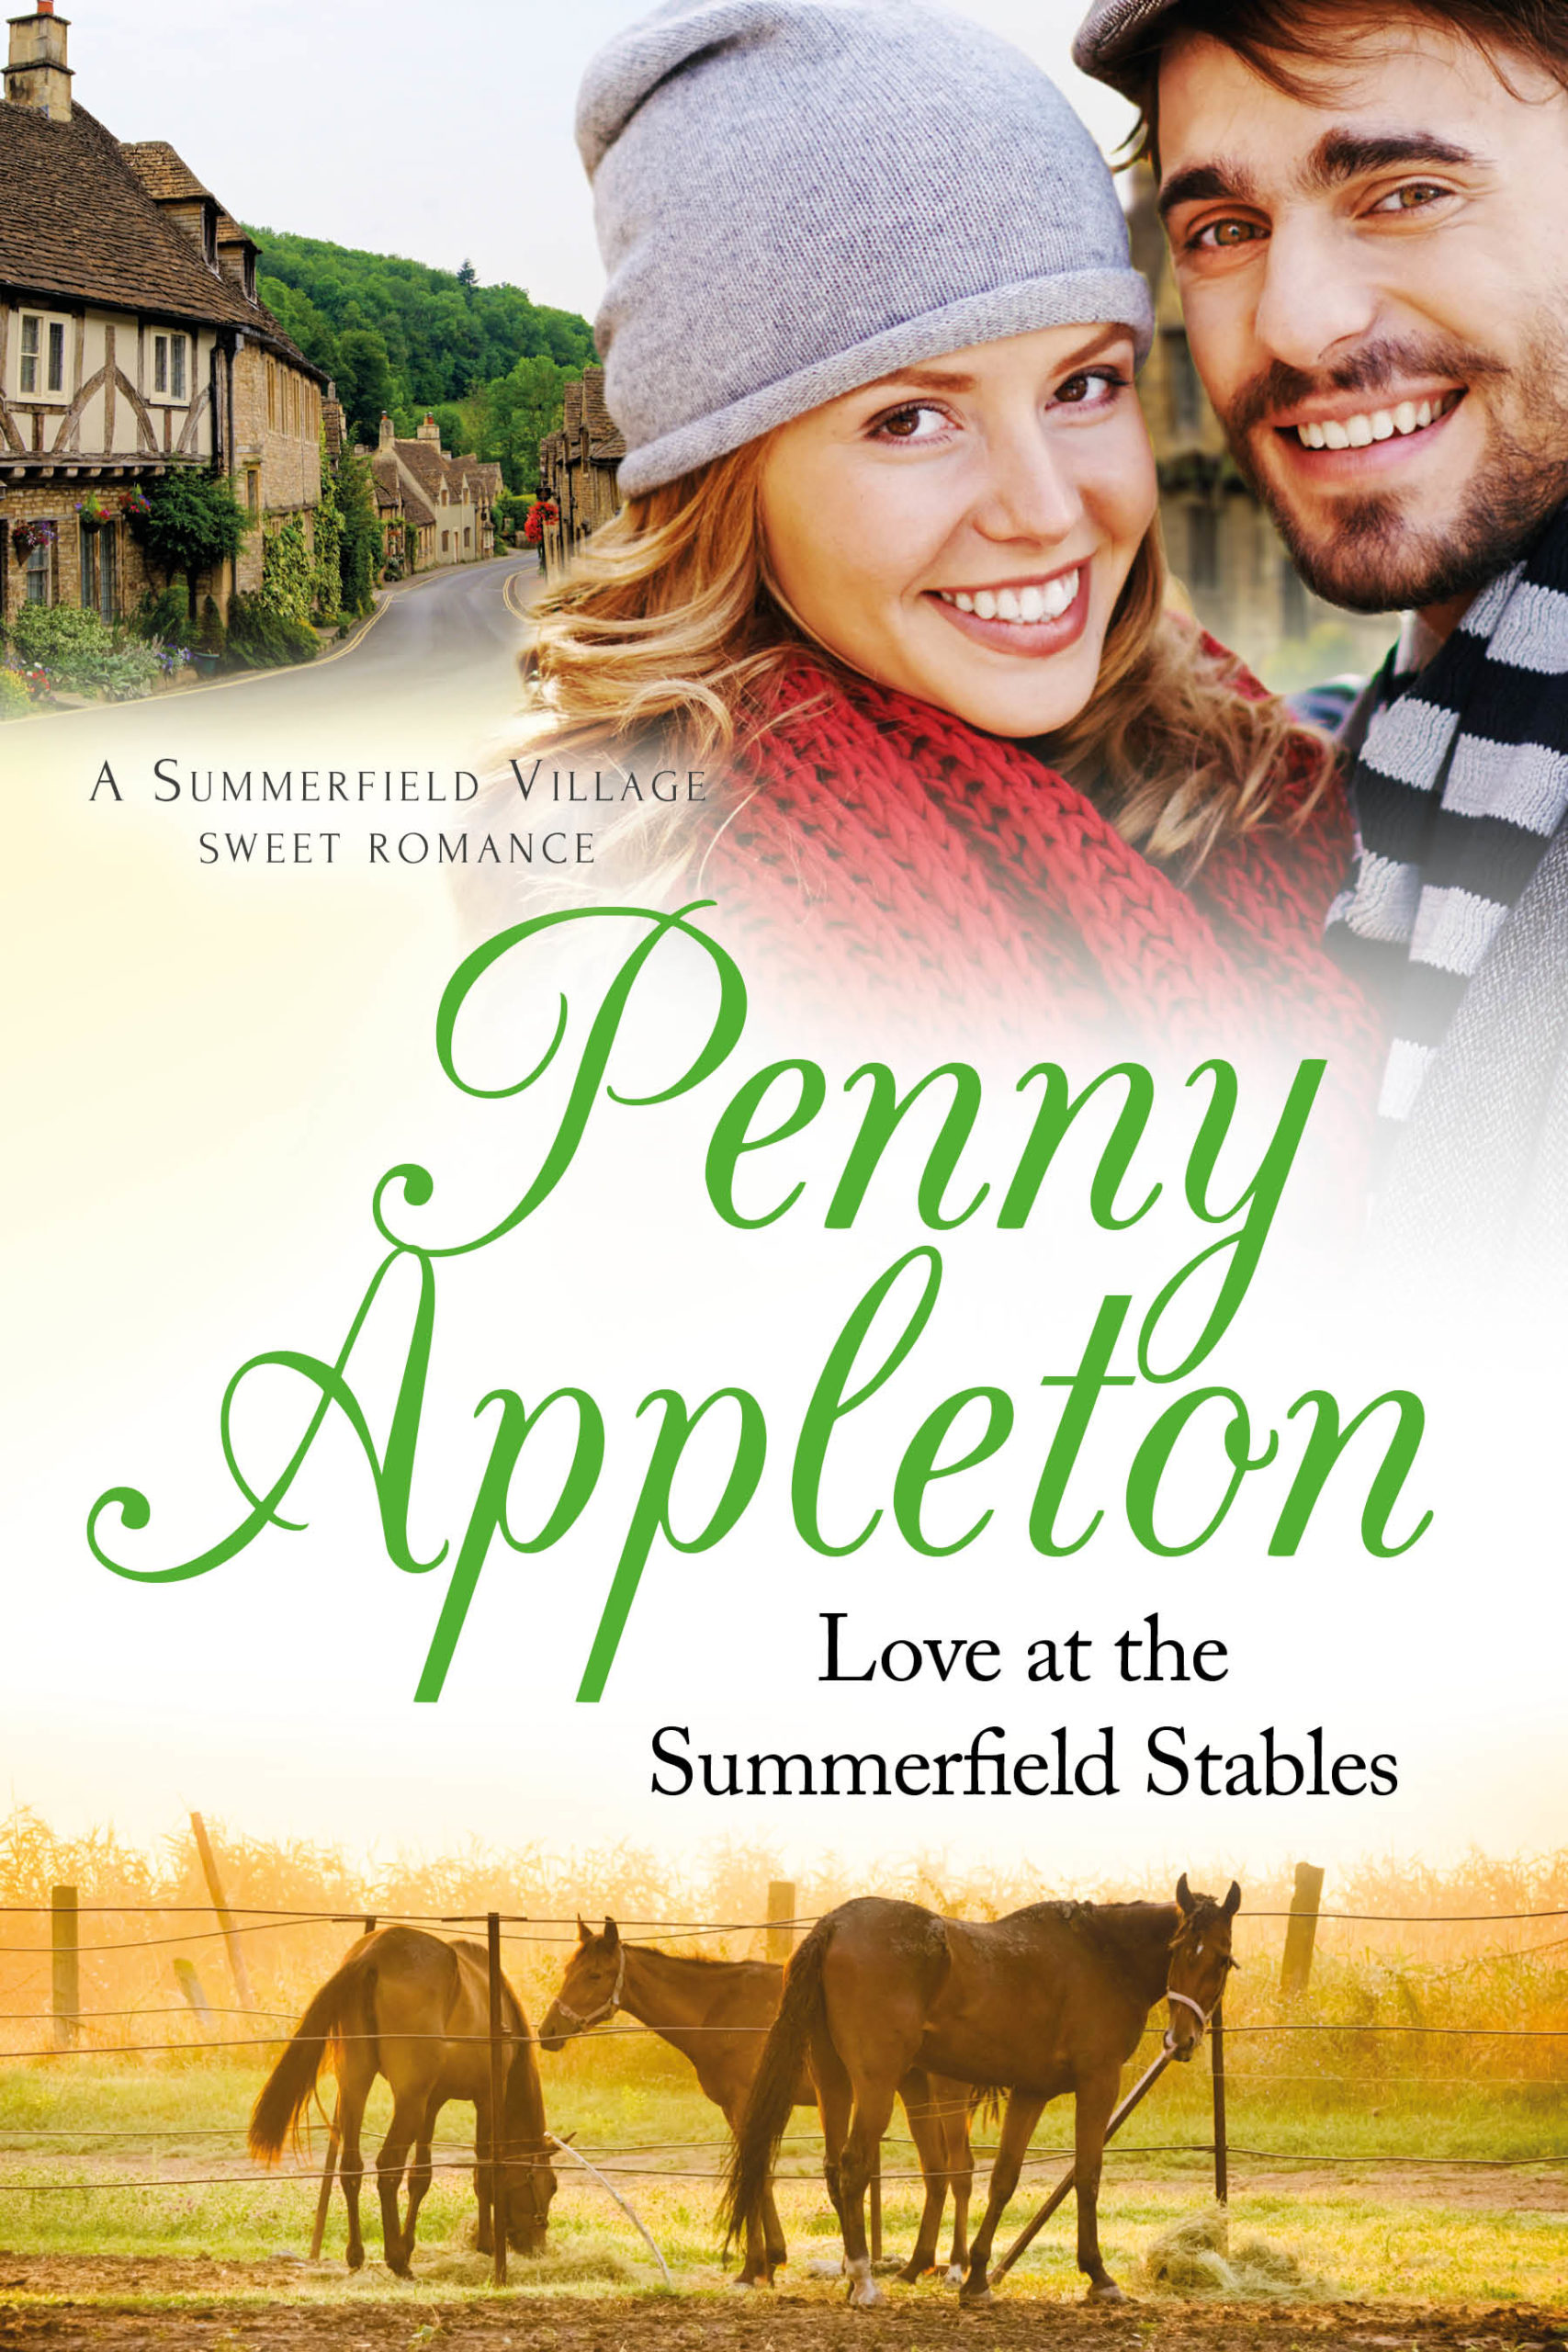 Love at the Summerfield Stables by Penny Appleton